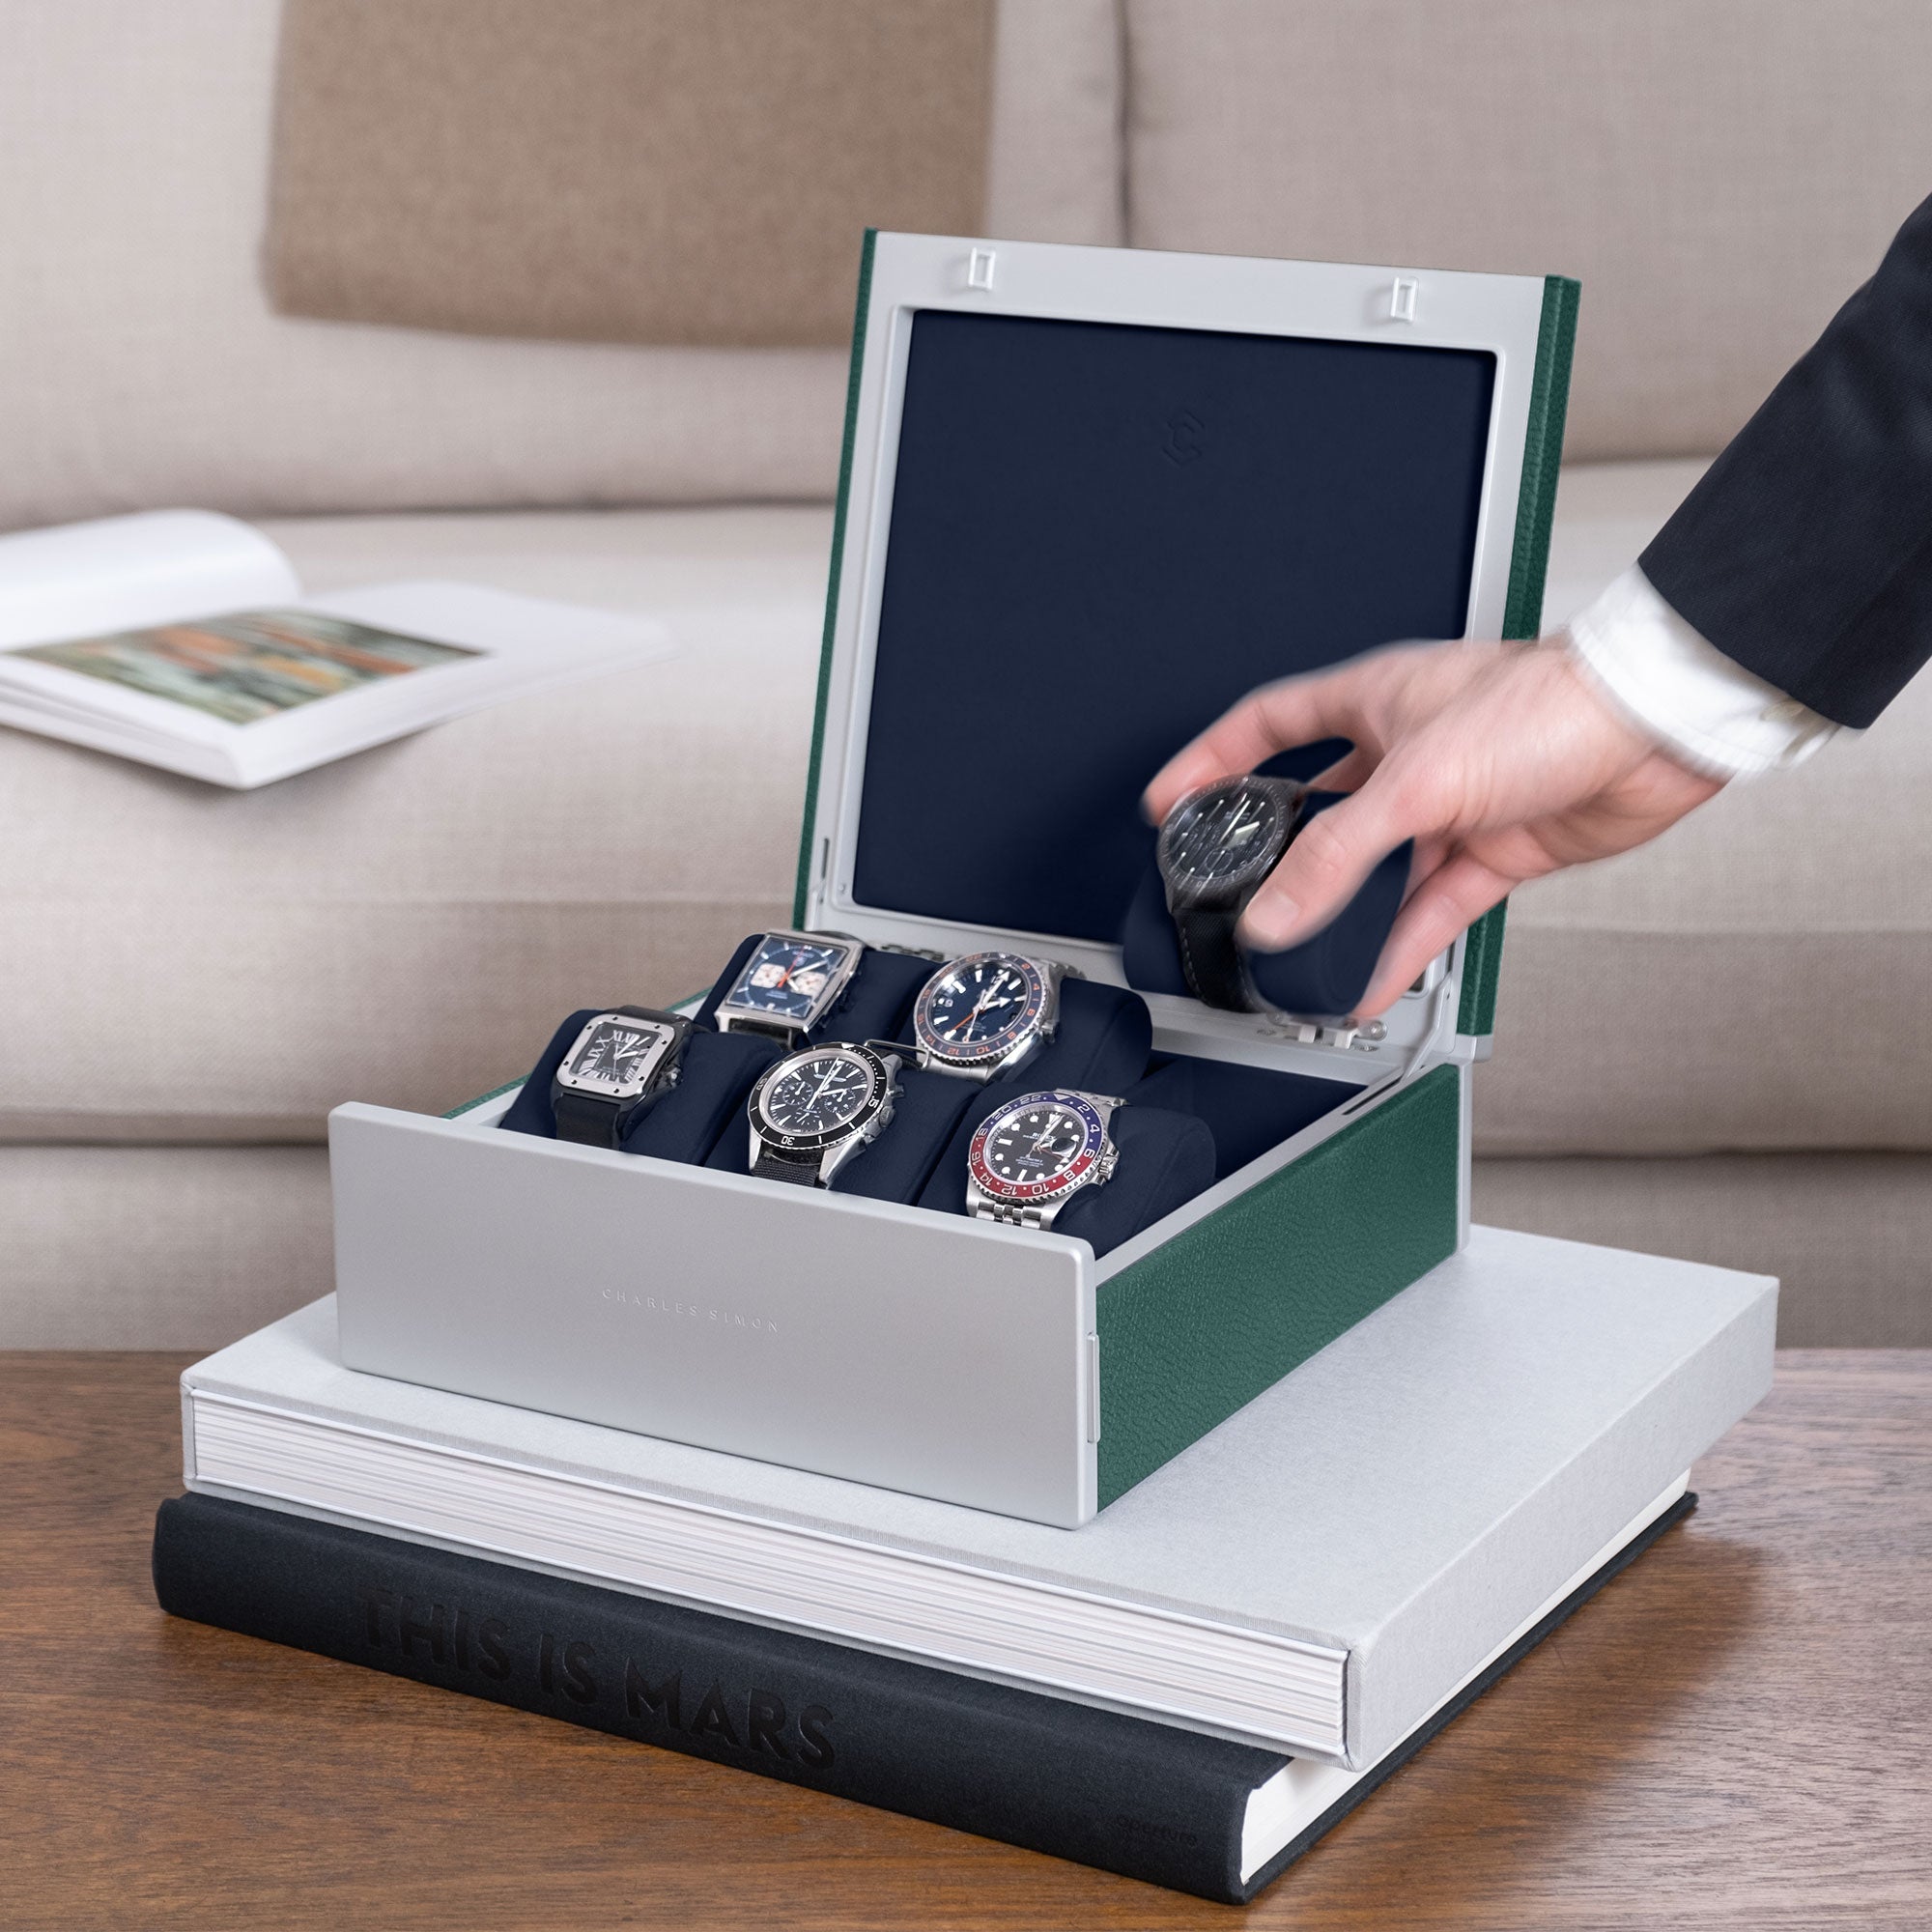 Lifestyle shot of emerald Spence watch box holding 6 luxury men's watches includng Rolex, Omega, Cartier, Jaeger Lecoultre. Business man is taking watch placed on deep blue Alcantara cushion from watch box